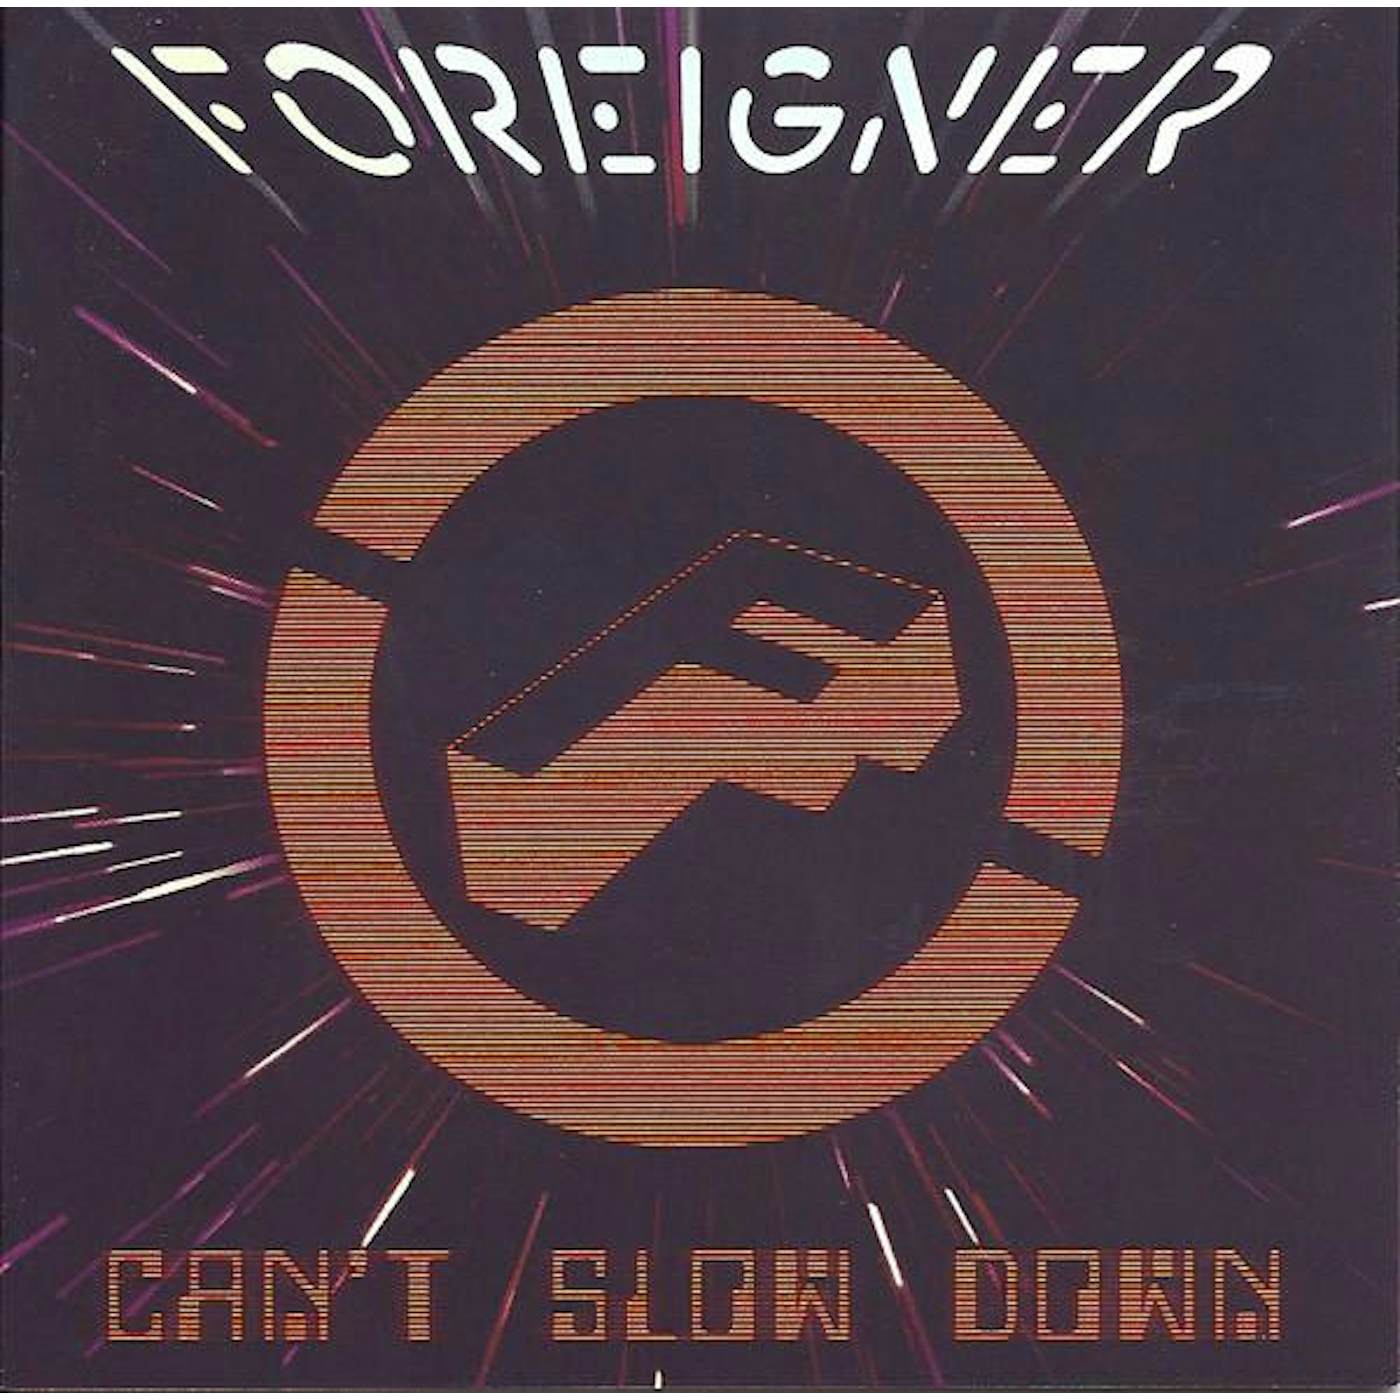 Foreigner CAN'T SLOW DOWN CD